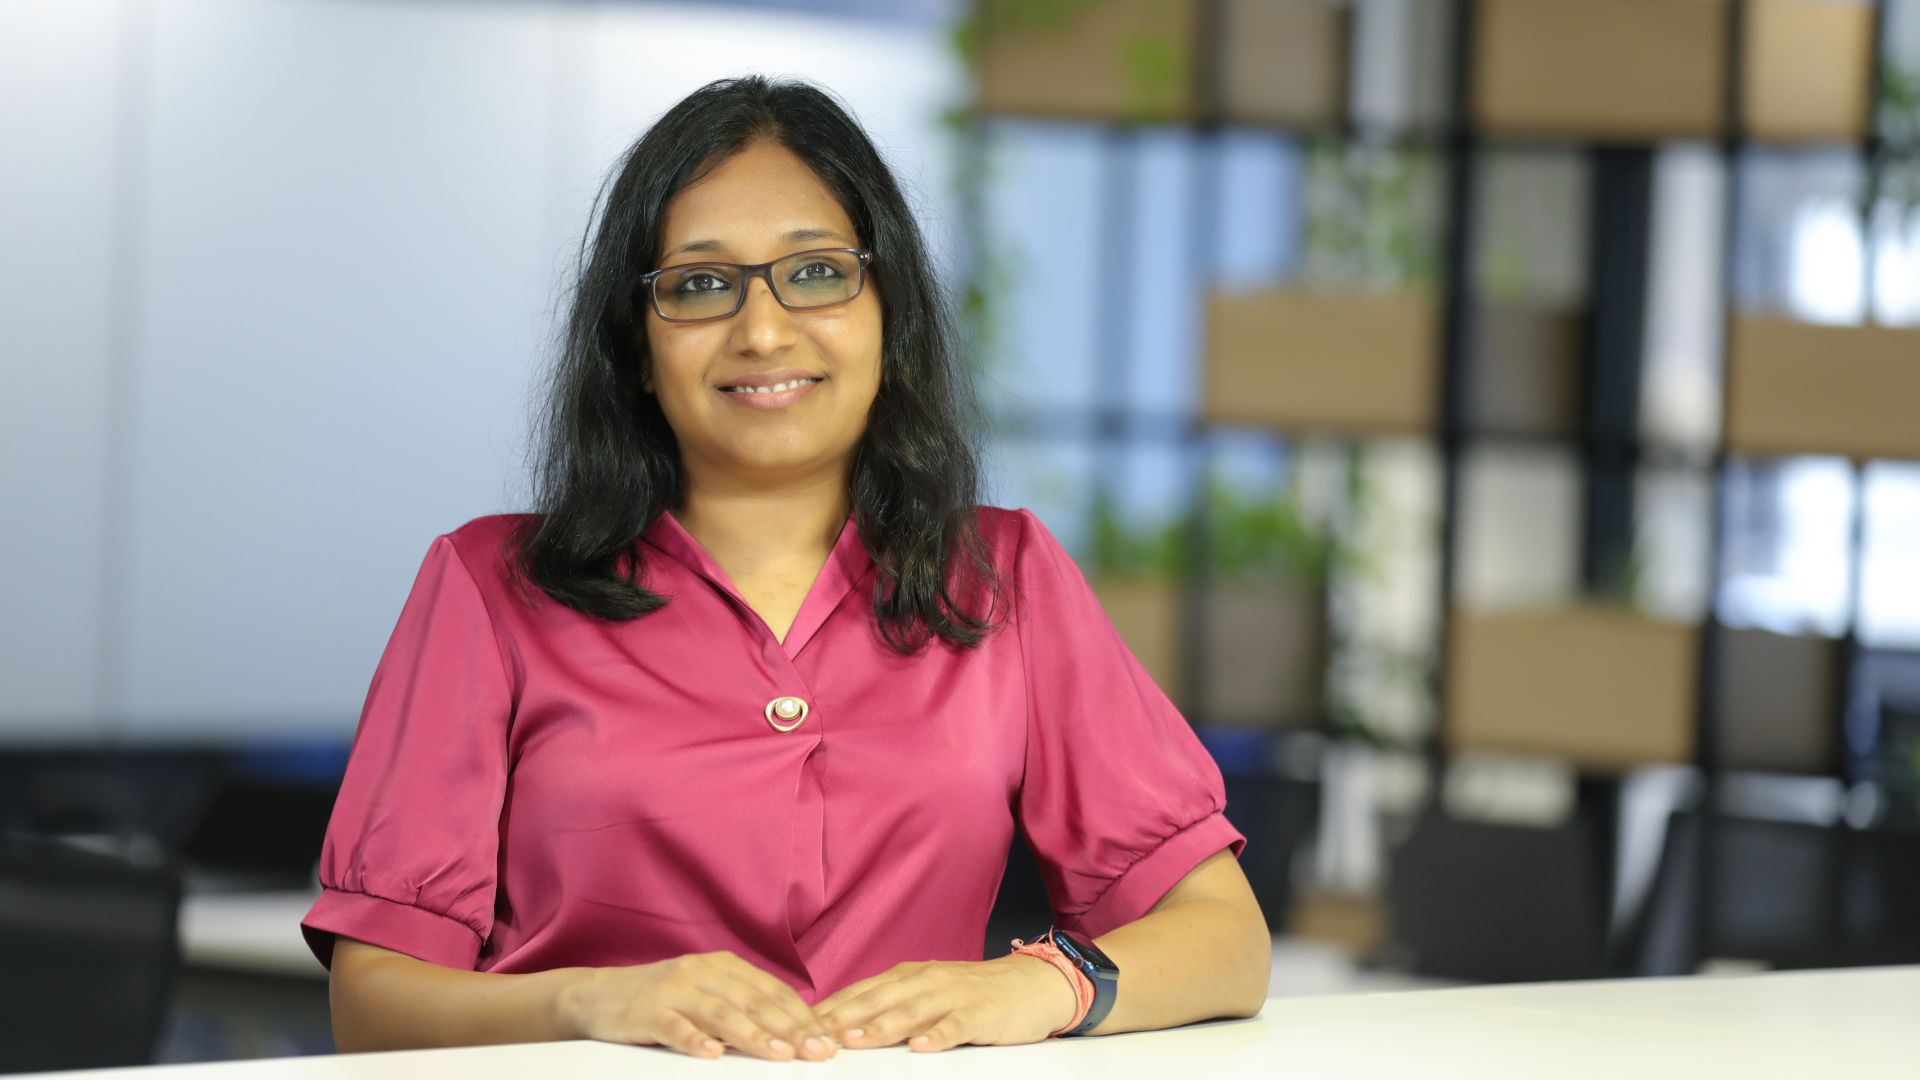 Consumers want value, not price: Deepali Agarwal, Philips